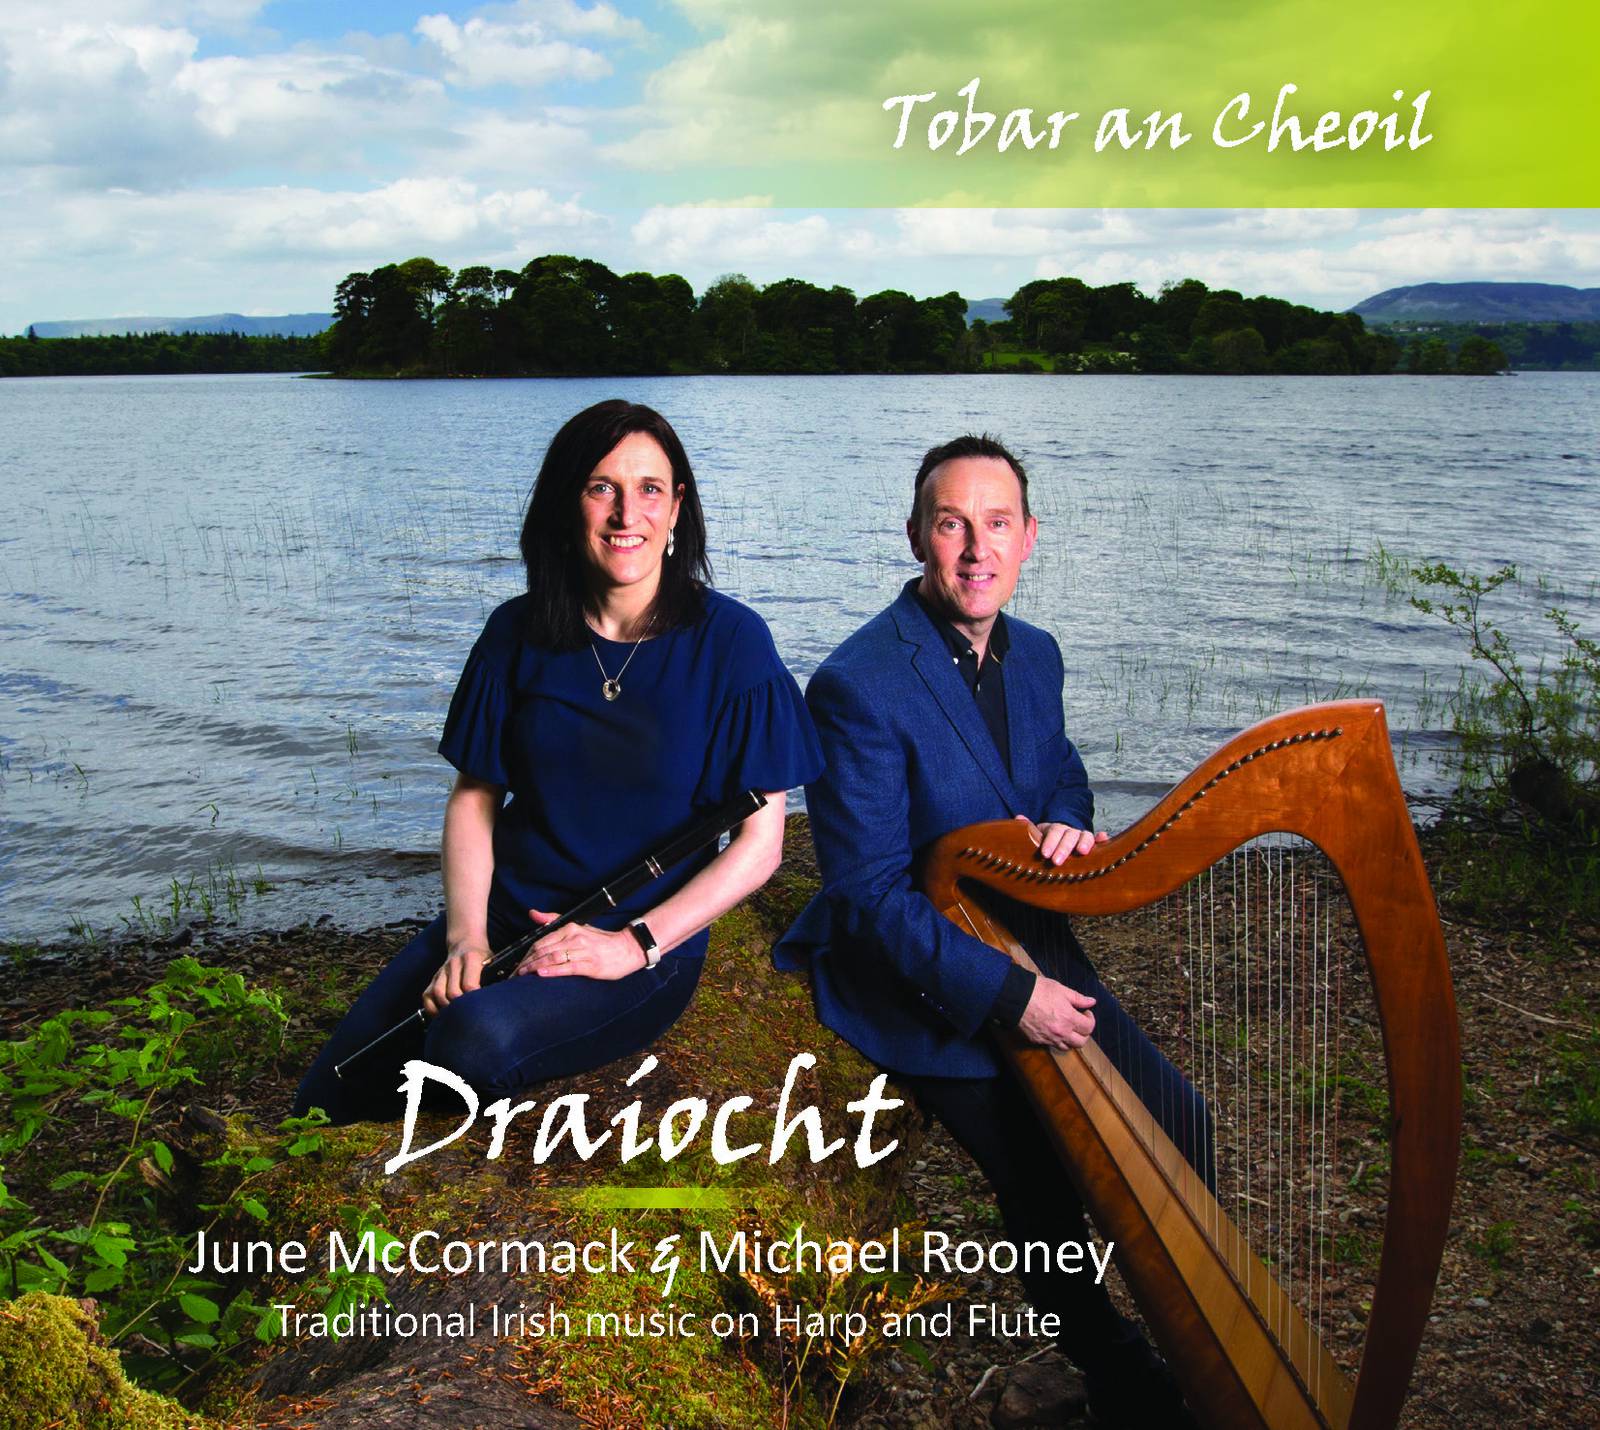 June McCormack holds her flute beside Michael Rooney with his harp, both sitting beside a lake